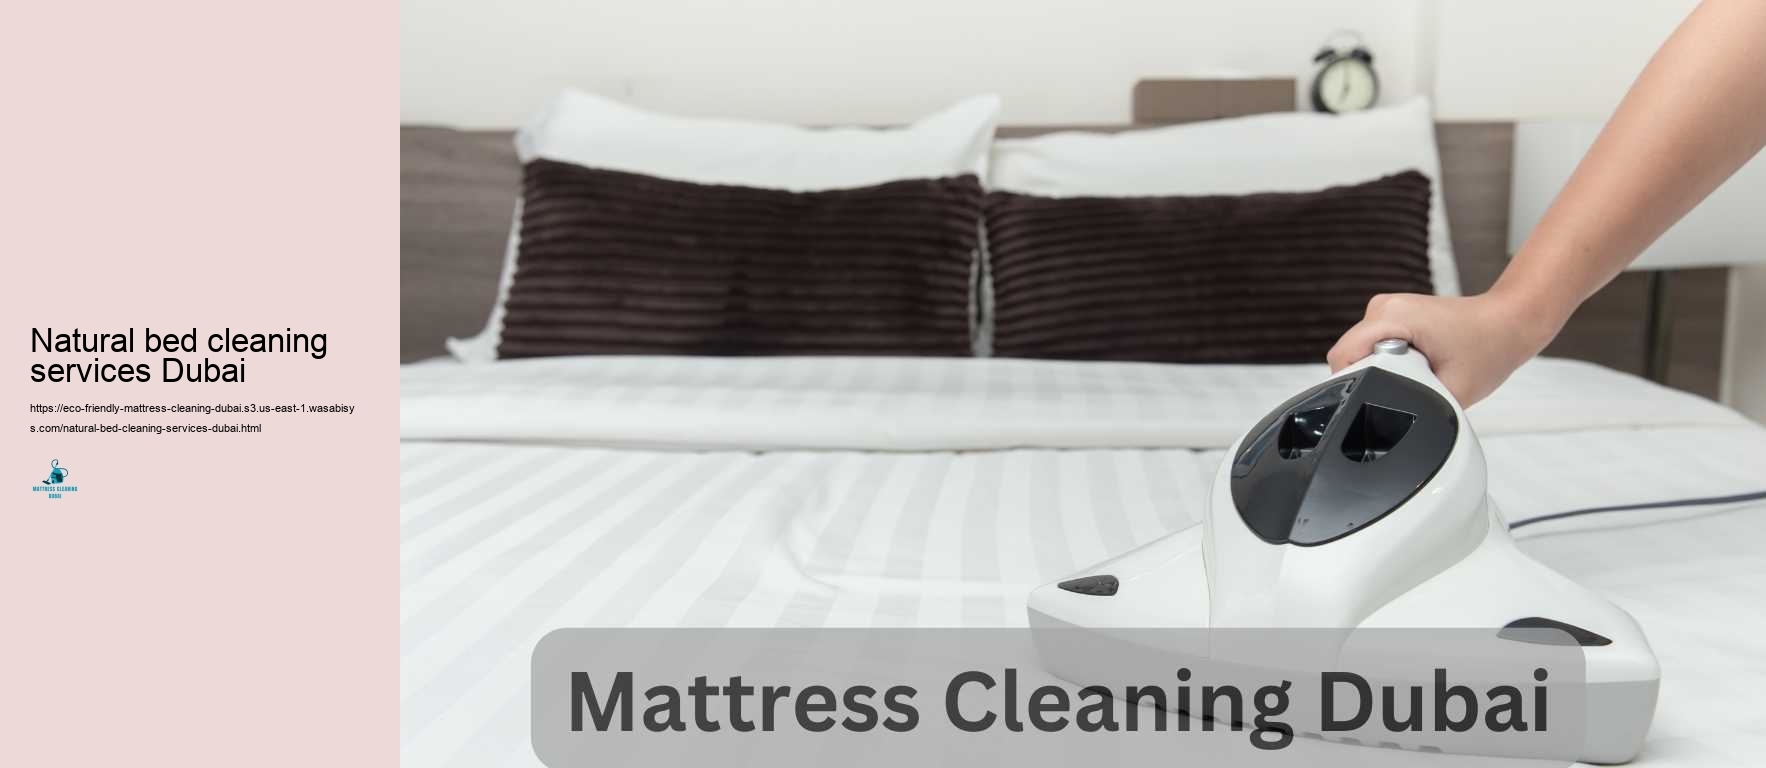 Natural bed cleaning services Dubai